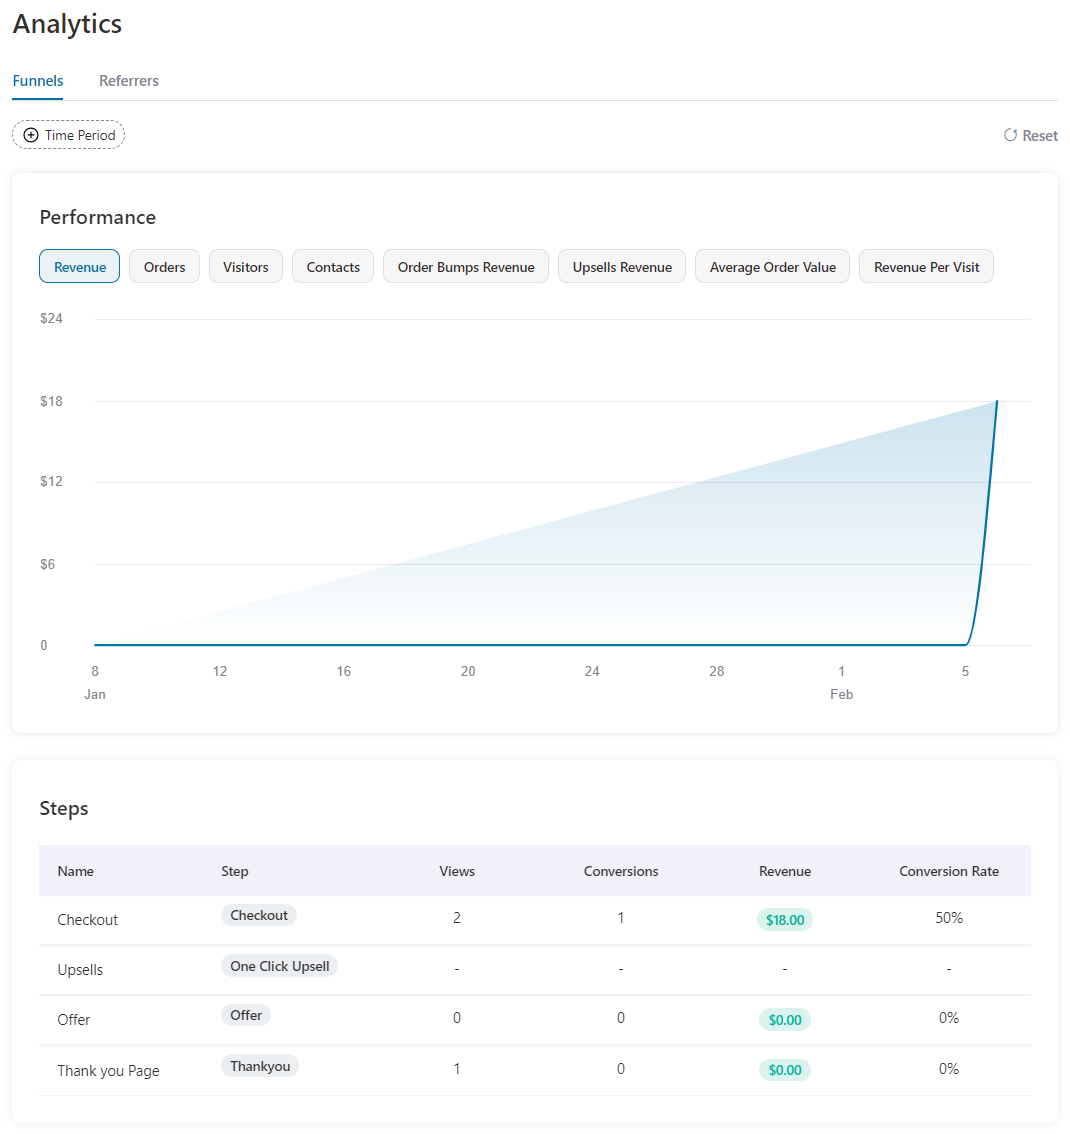 See the detailed step breakdown along with views, conversions, revenue and conversion rate